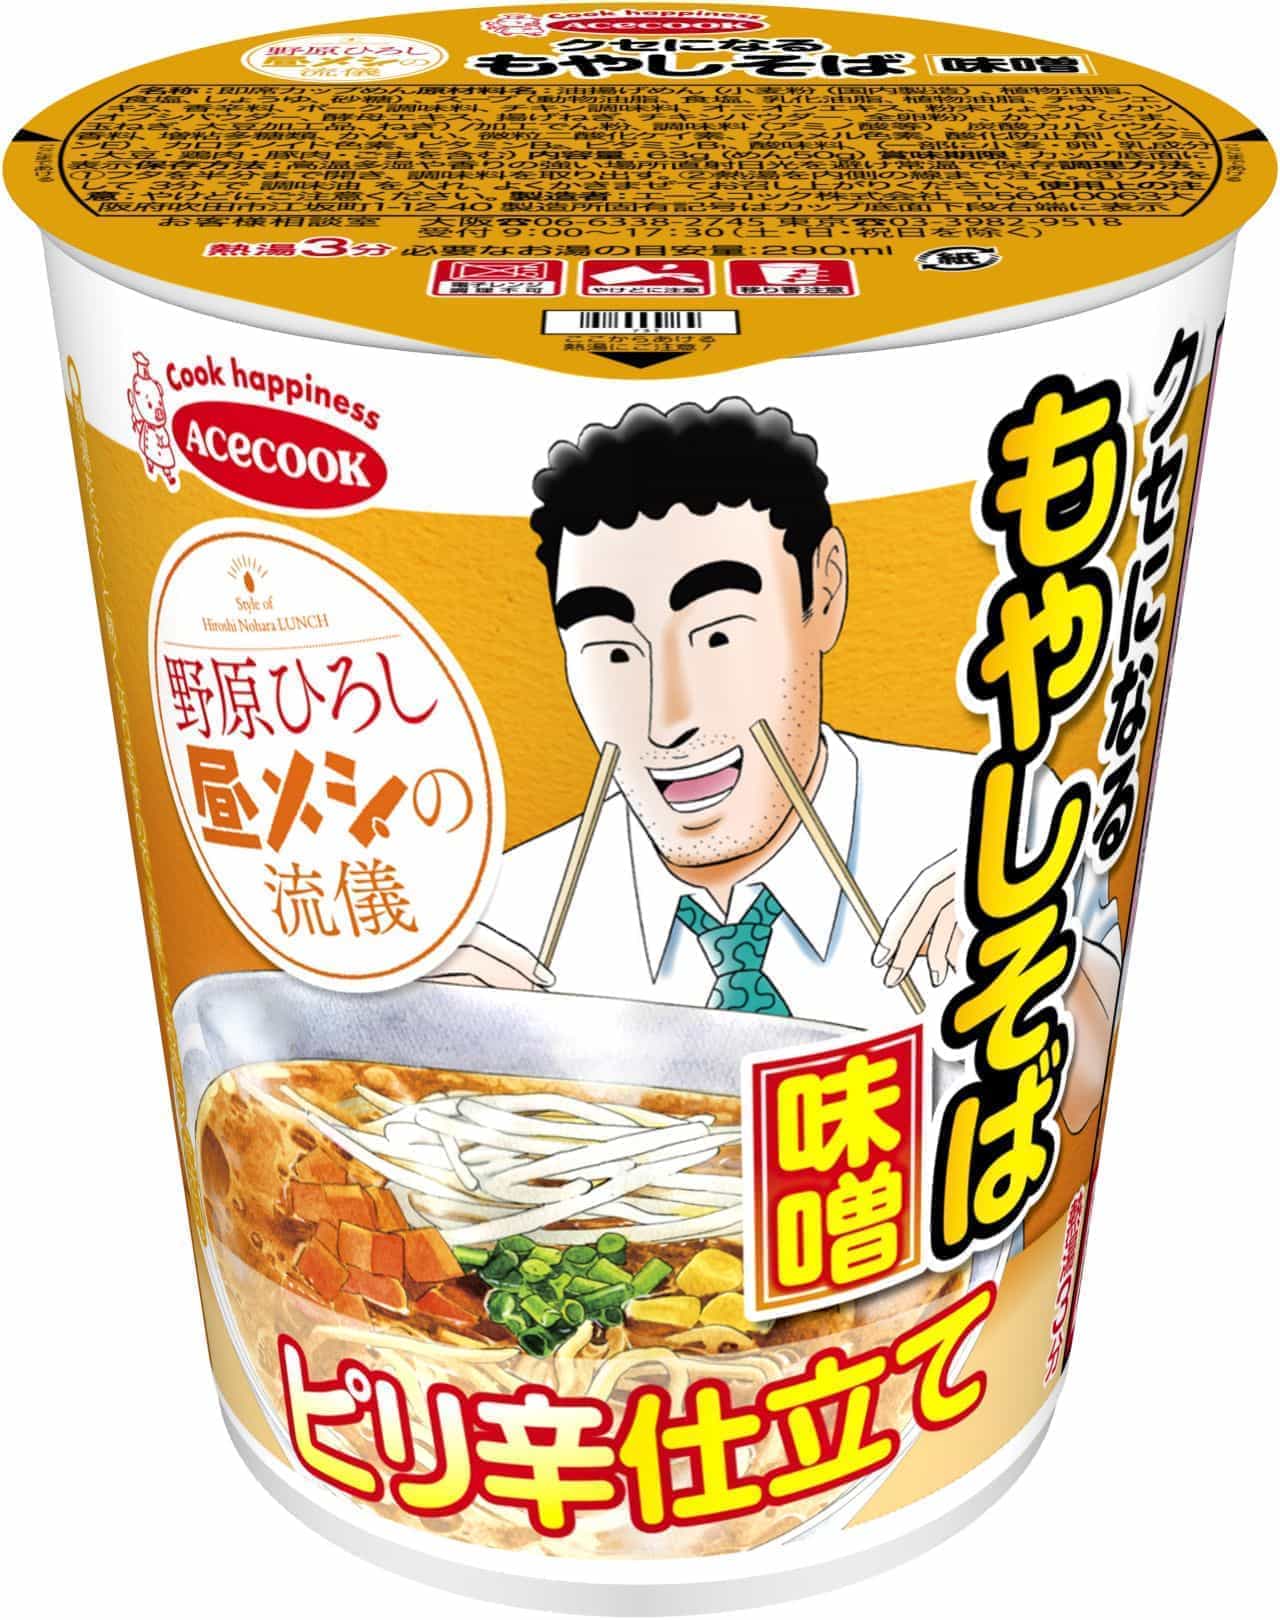 Acecook "Hiroshi Nohara, bean sprout soba miso that becomes a habit of lunch meal"